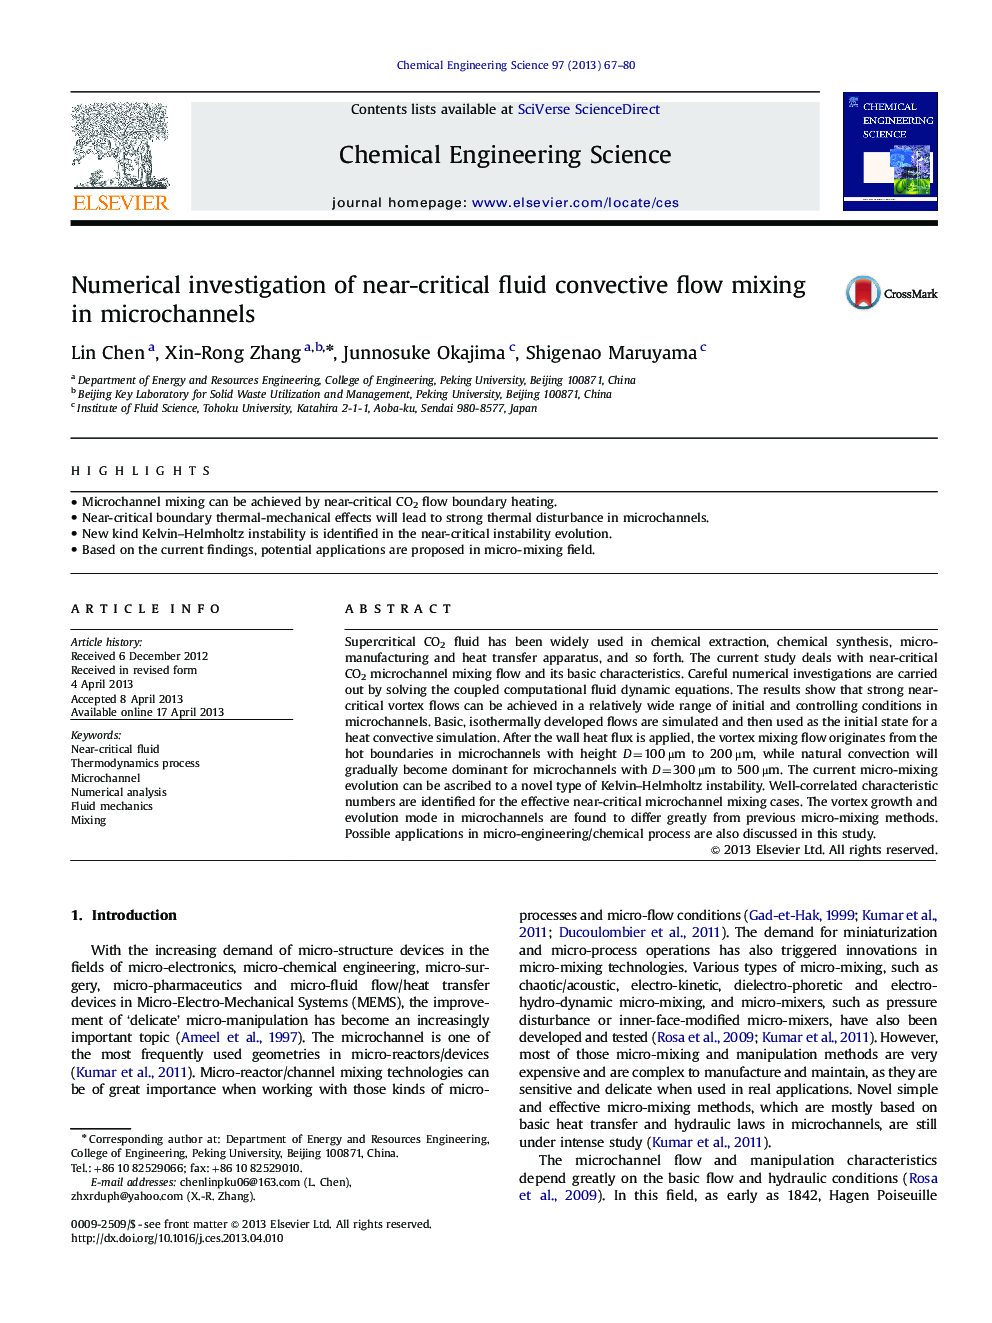 Numerical investigation of near-critical fluid convective flow mixing in microchannels